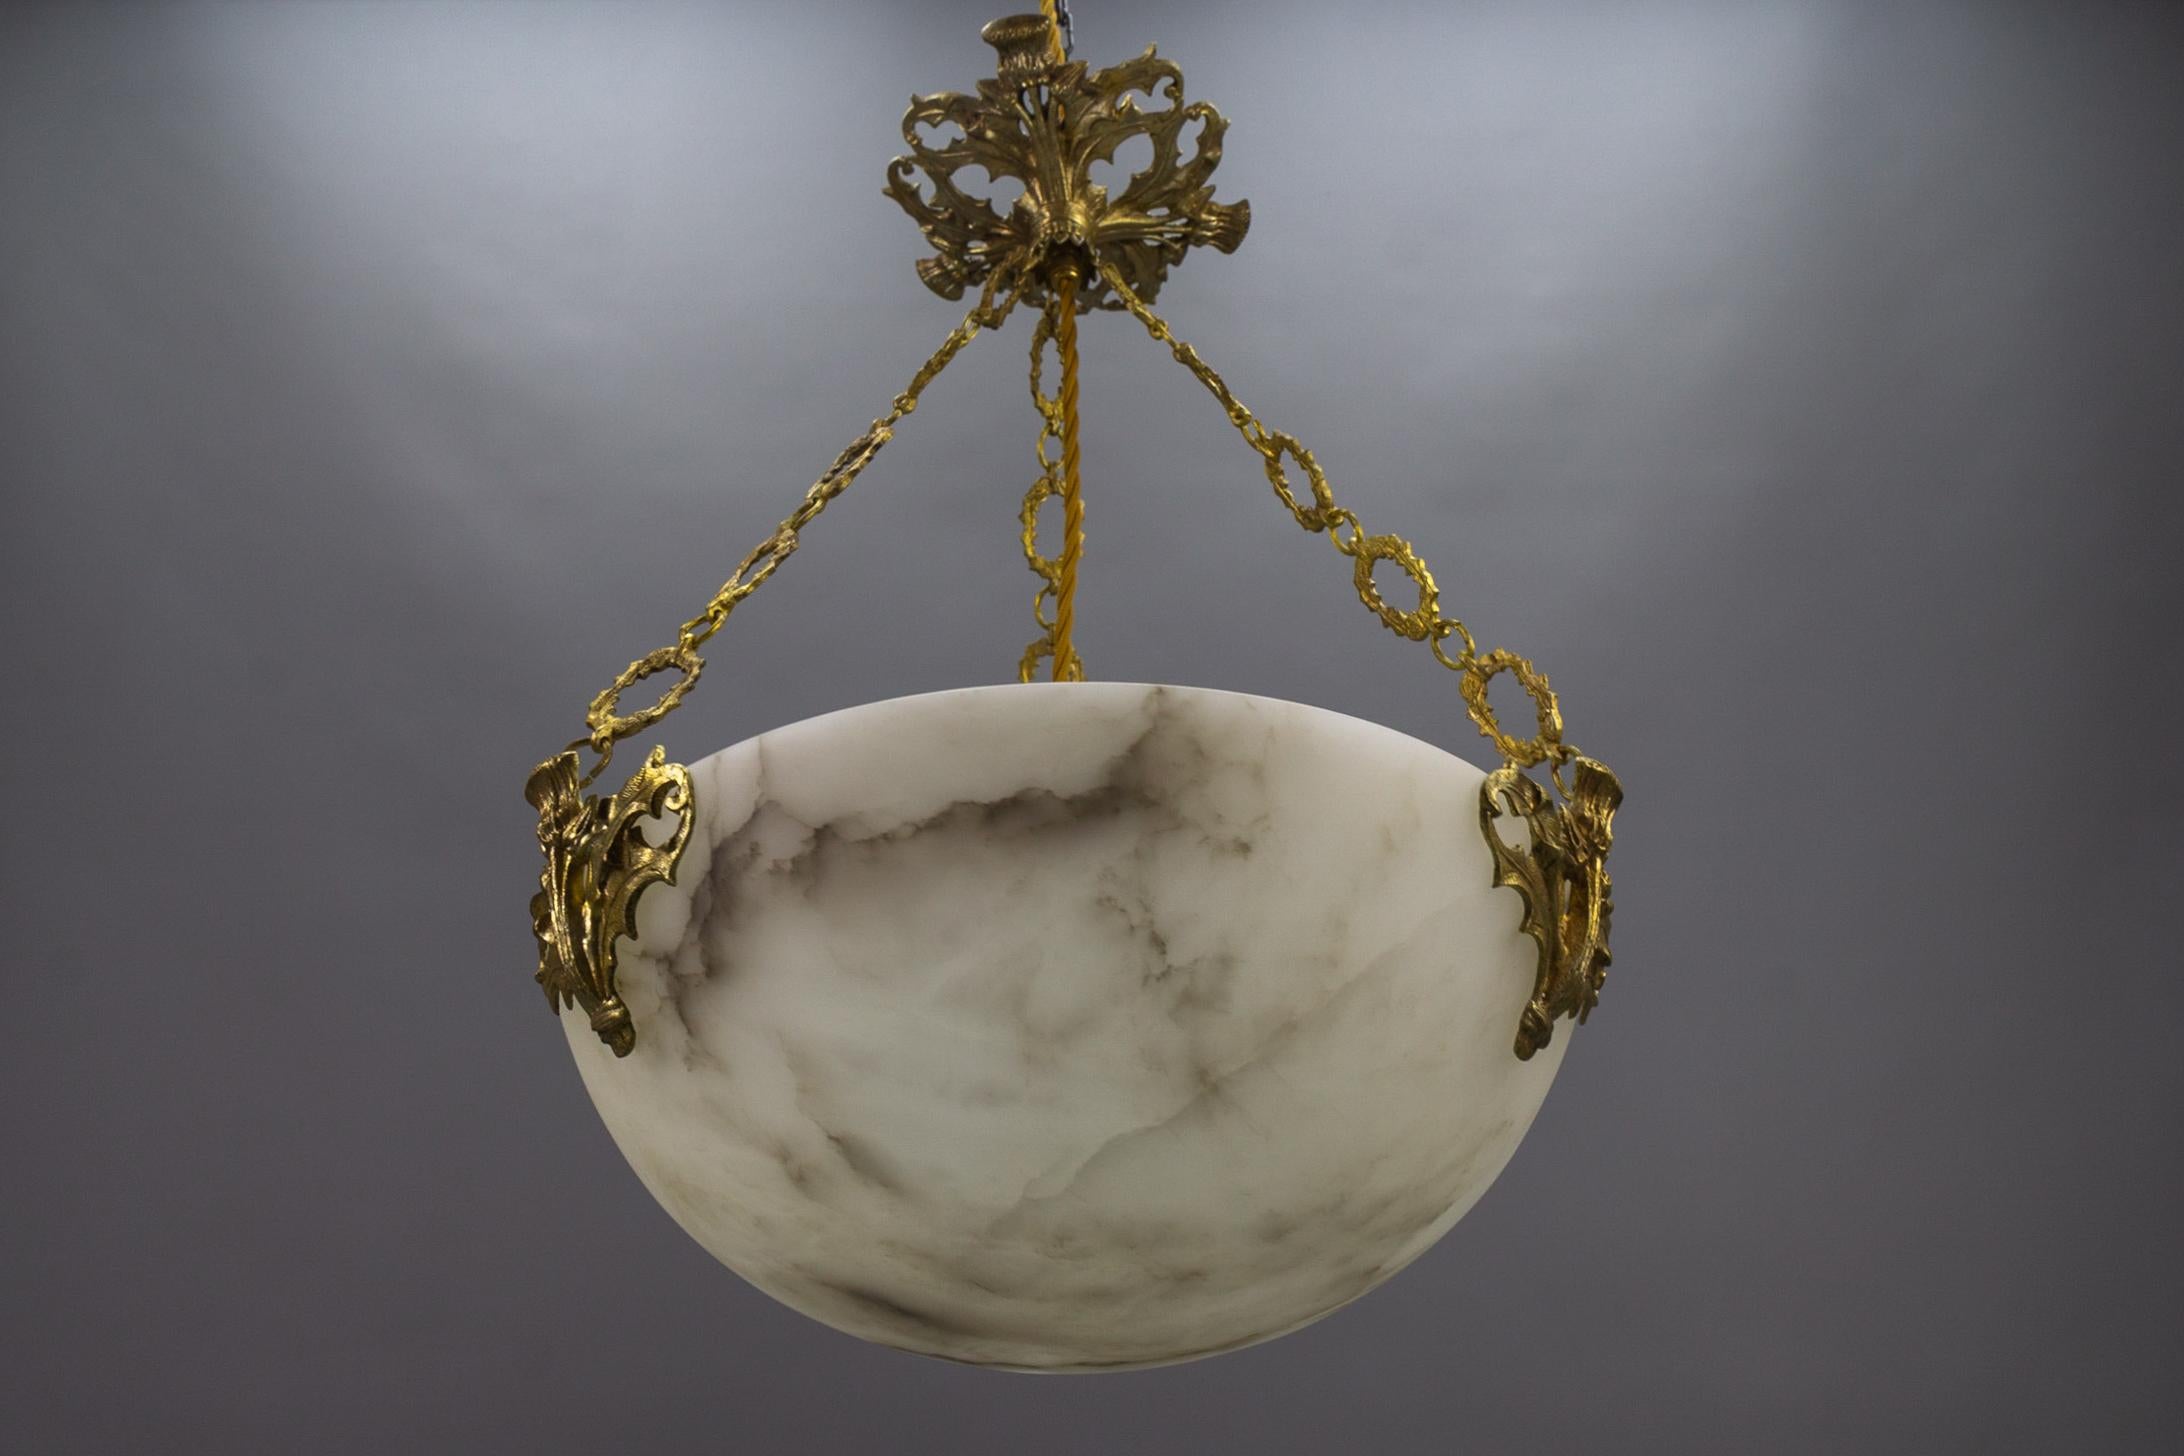 Art Deco white and black veined alabaster pendant light fixture.
A wonderful alabaster pendant ceiling light fixture from circa the 1920s. Beautifully veined and masterfully carved white alabaster bowl suspended by three decorative bronze chains,